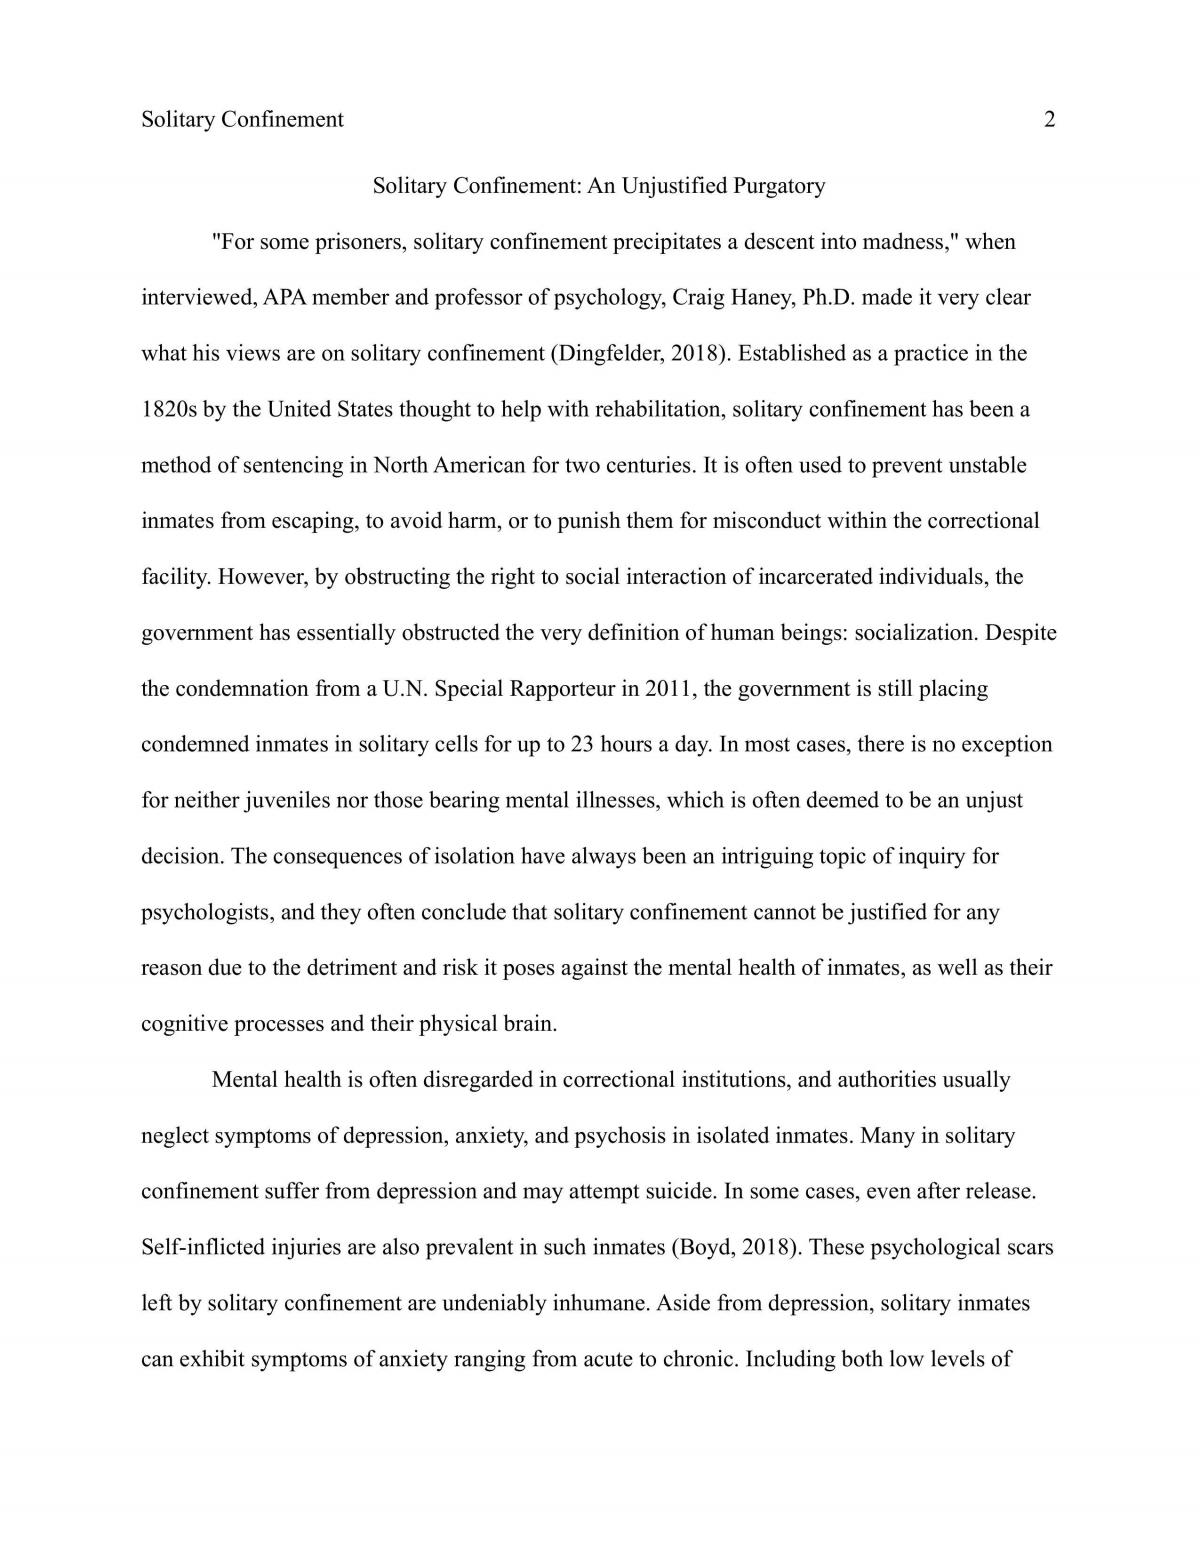 Culminating Essay, intro to anthro, psy, and sociology - Page 2